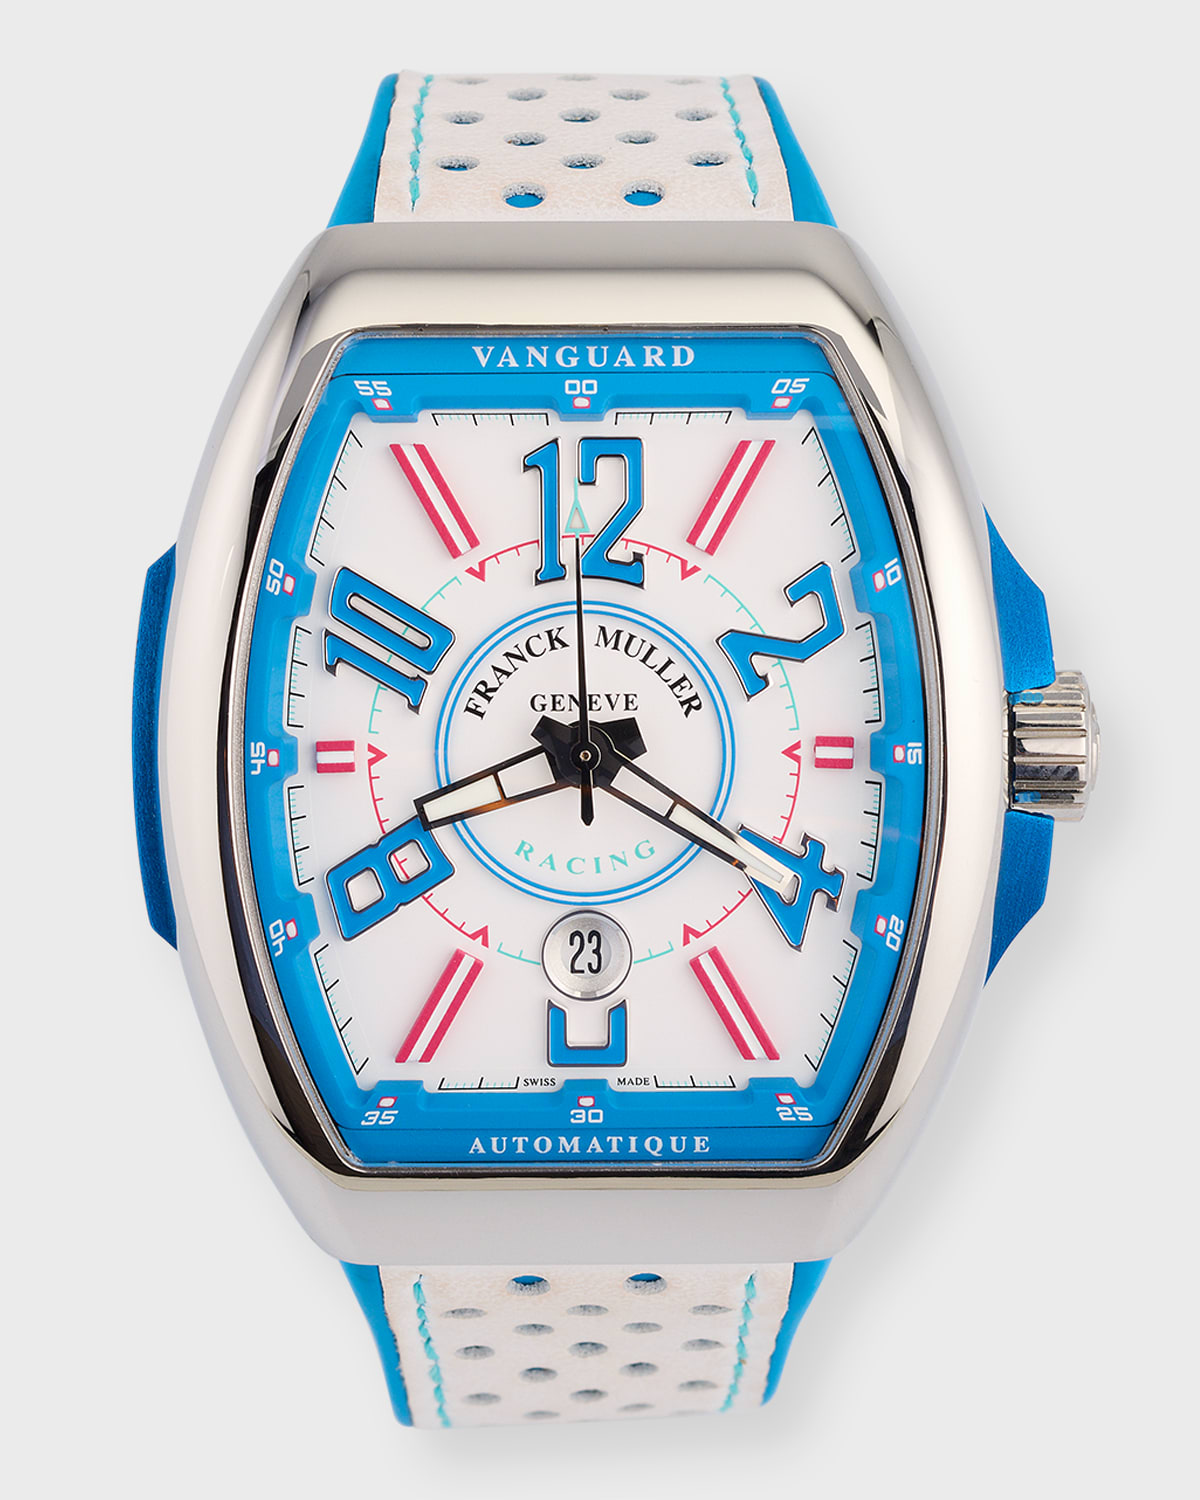 45mm Vanguard Racing Automatic White and Blue Accent Watch